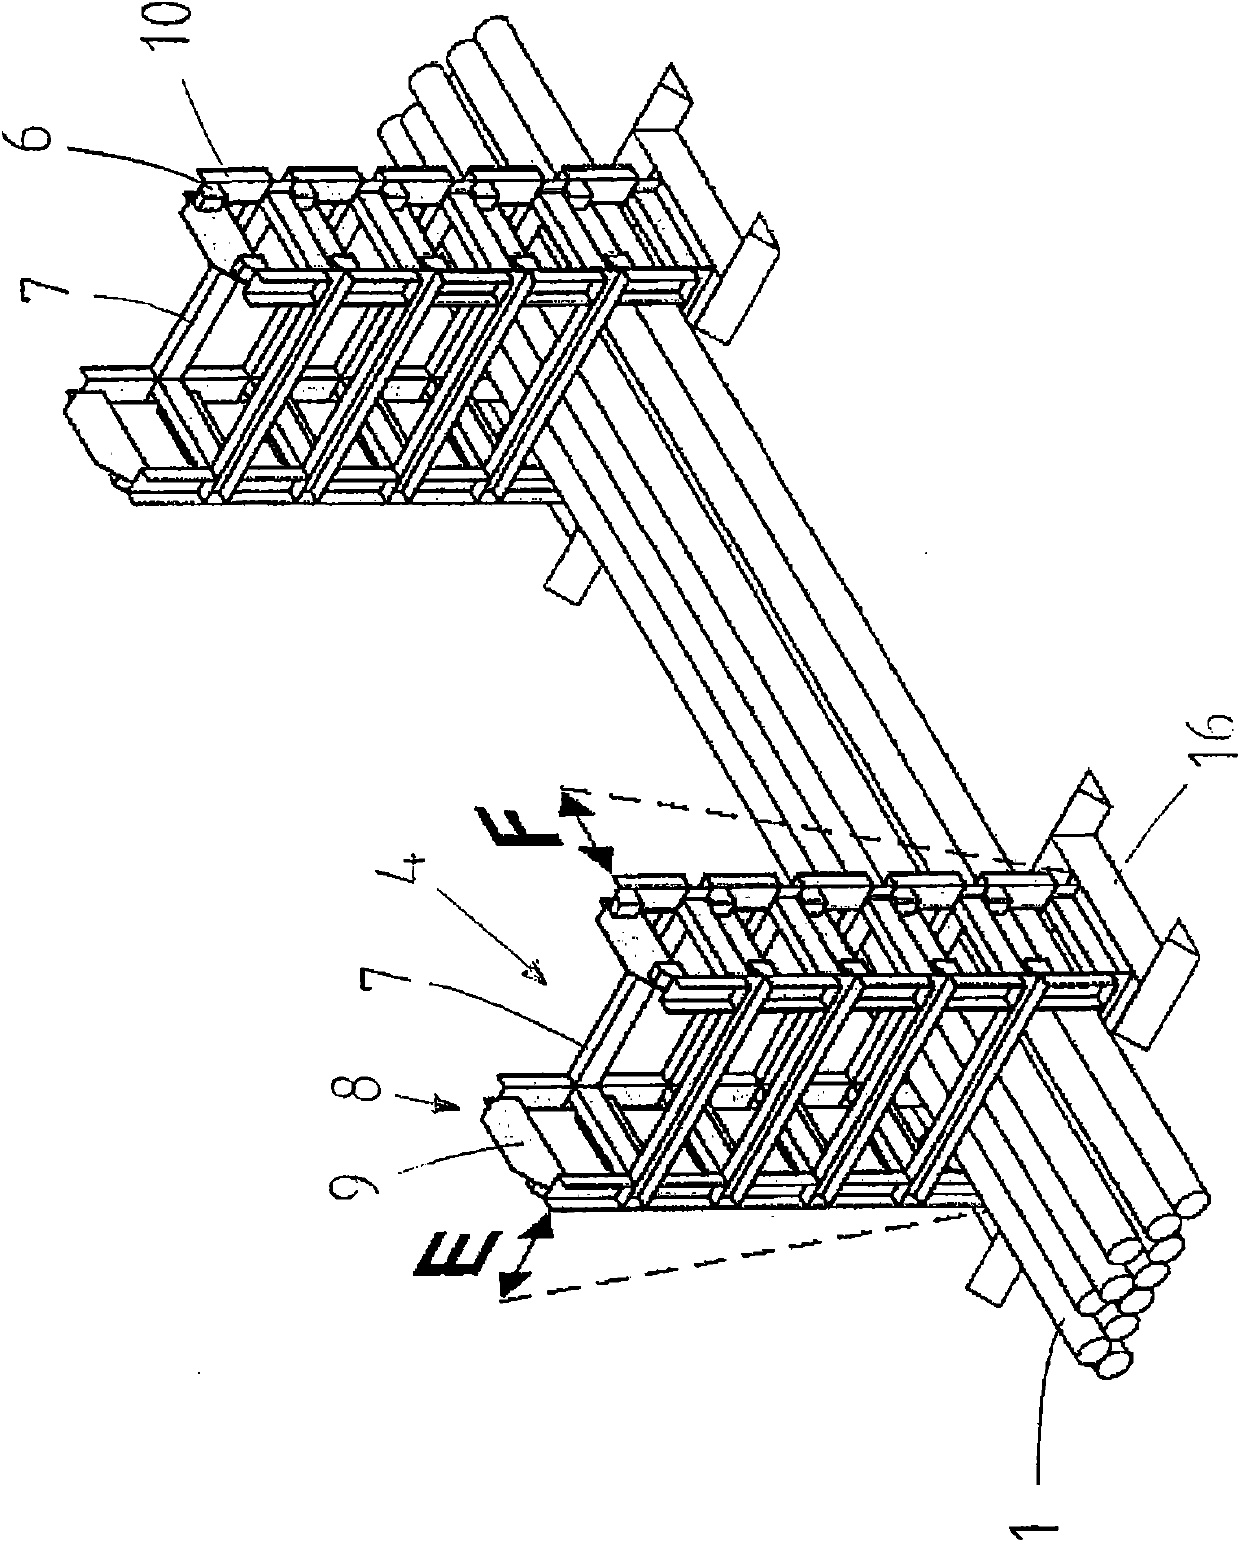 Stackable supports and storage and transport systems for heavy objects